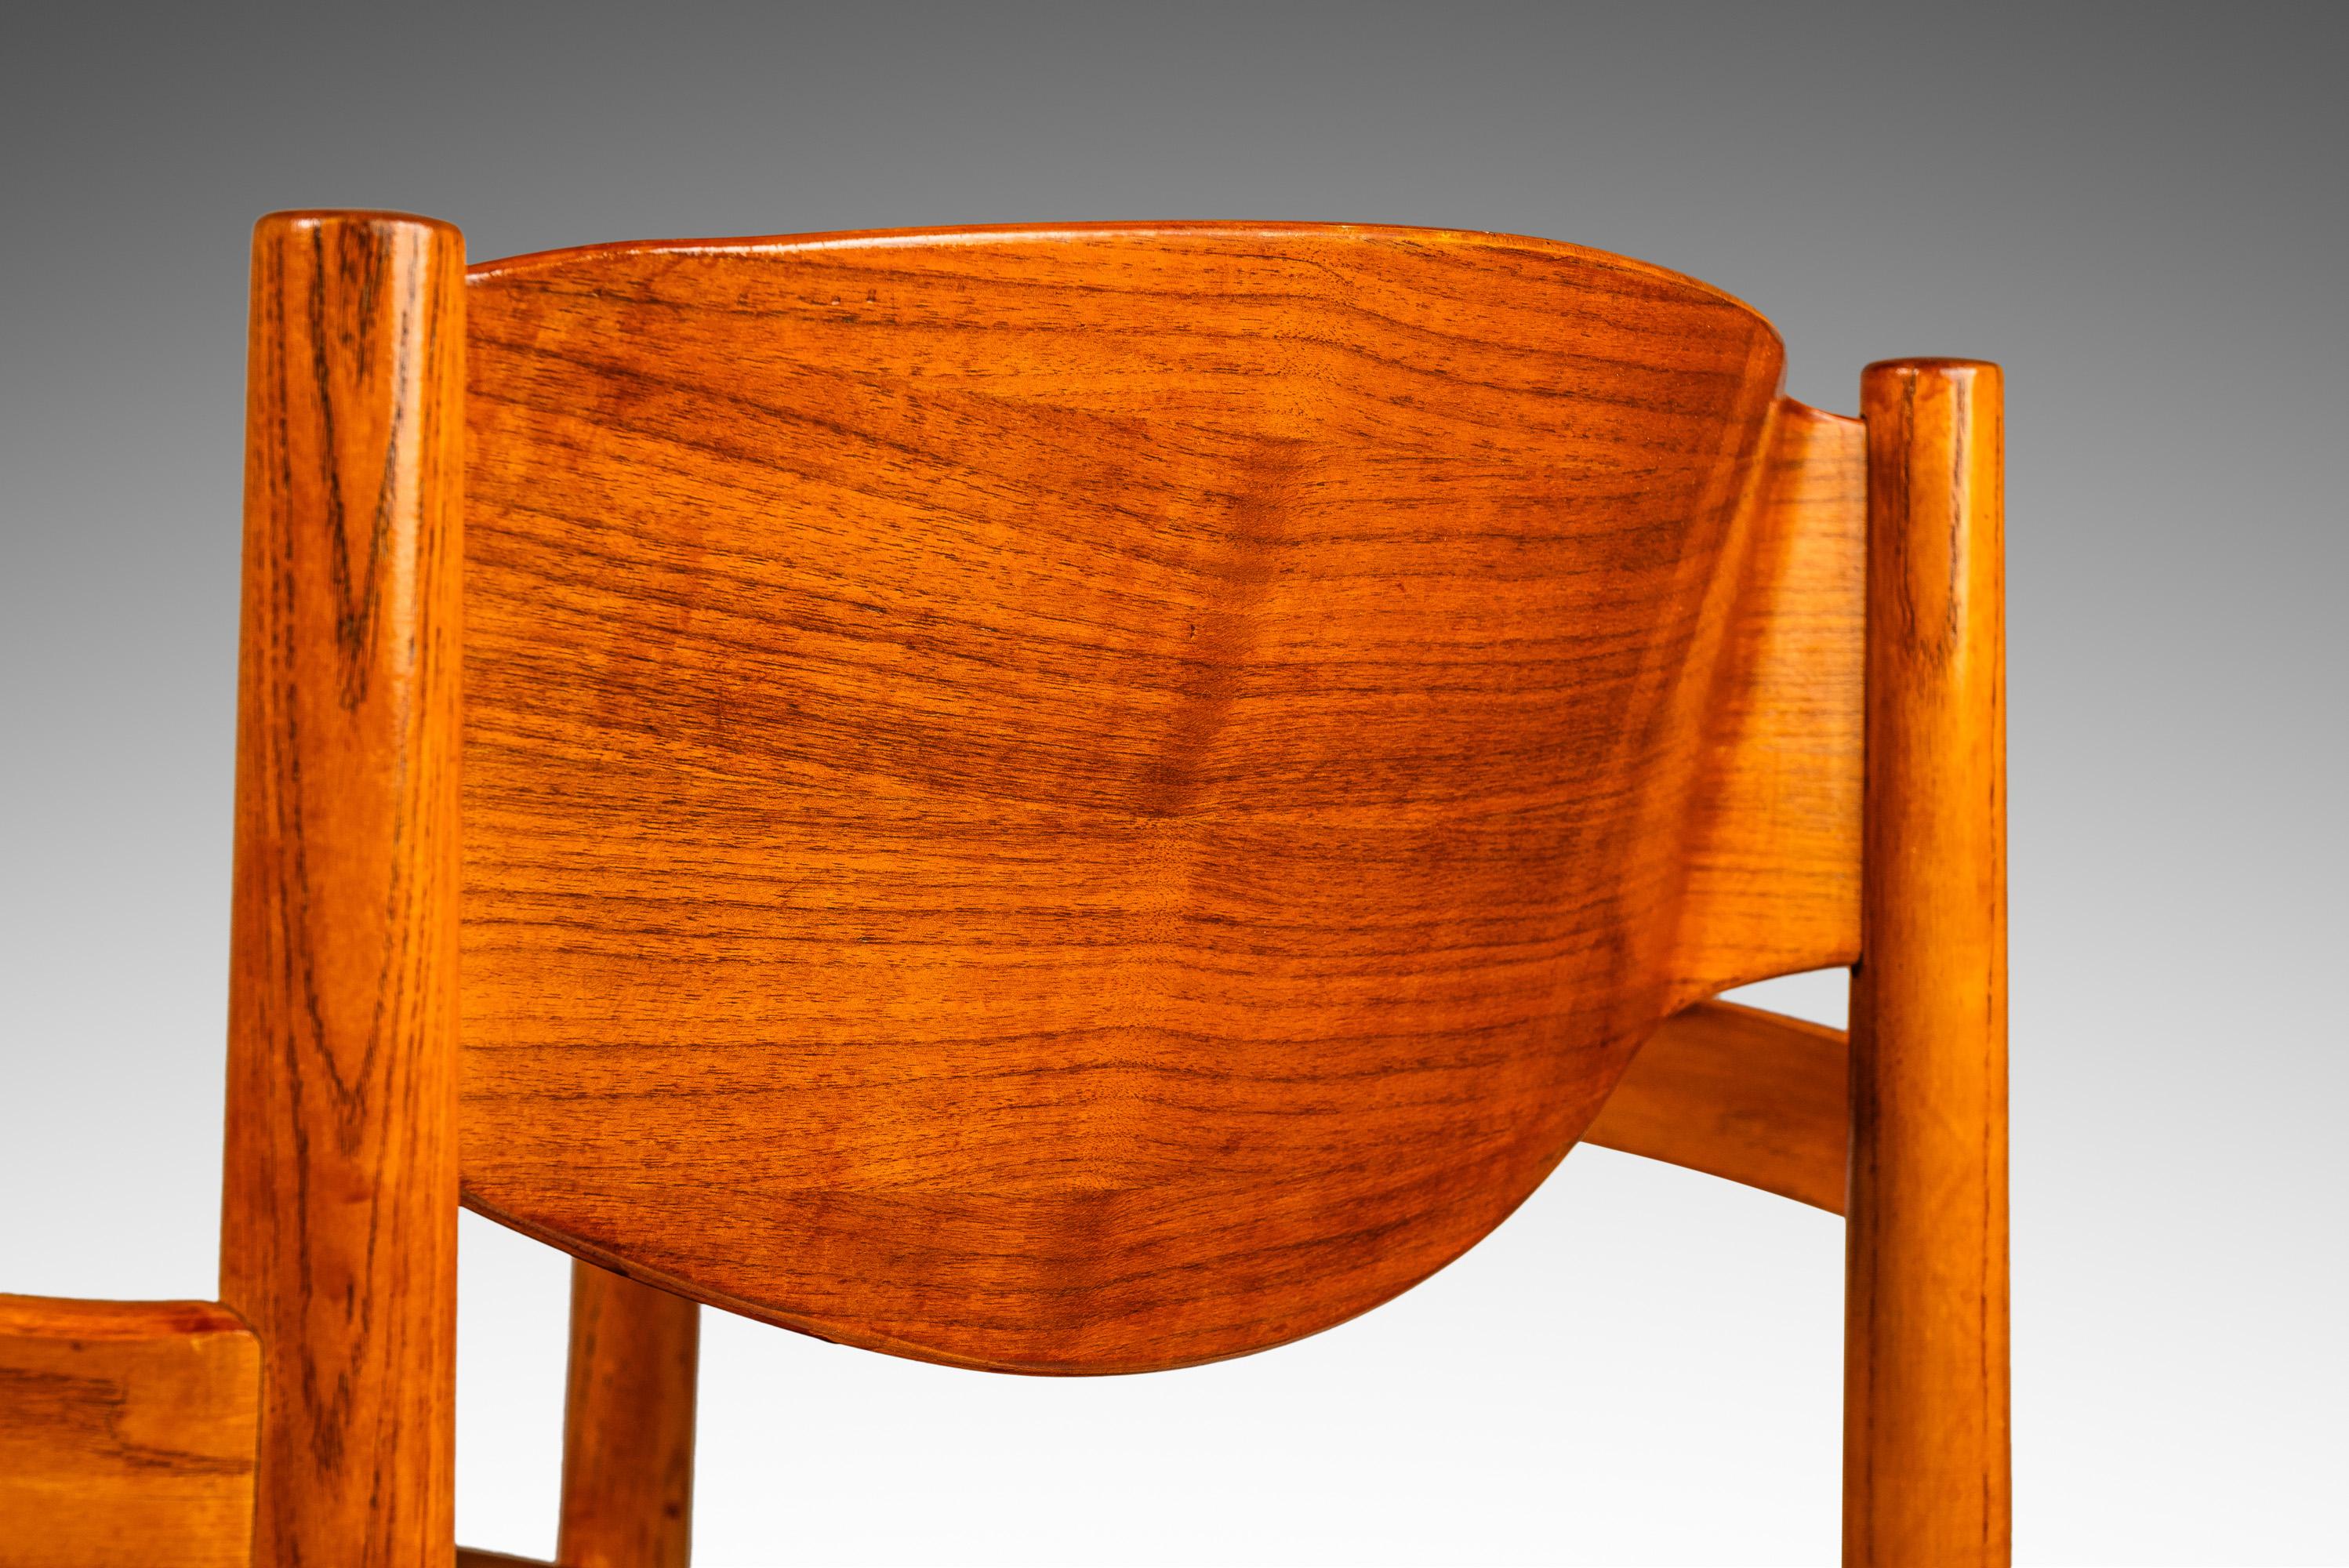 Set of 6 Stacking in Oak & Walnut Chairs by Jens Risom, USA, c. 1960s For Sale 7